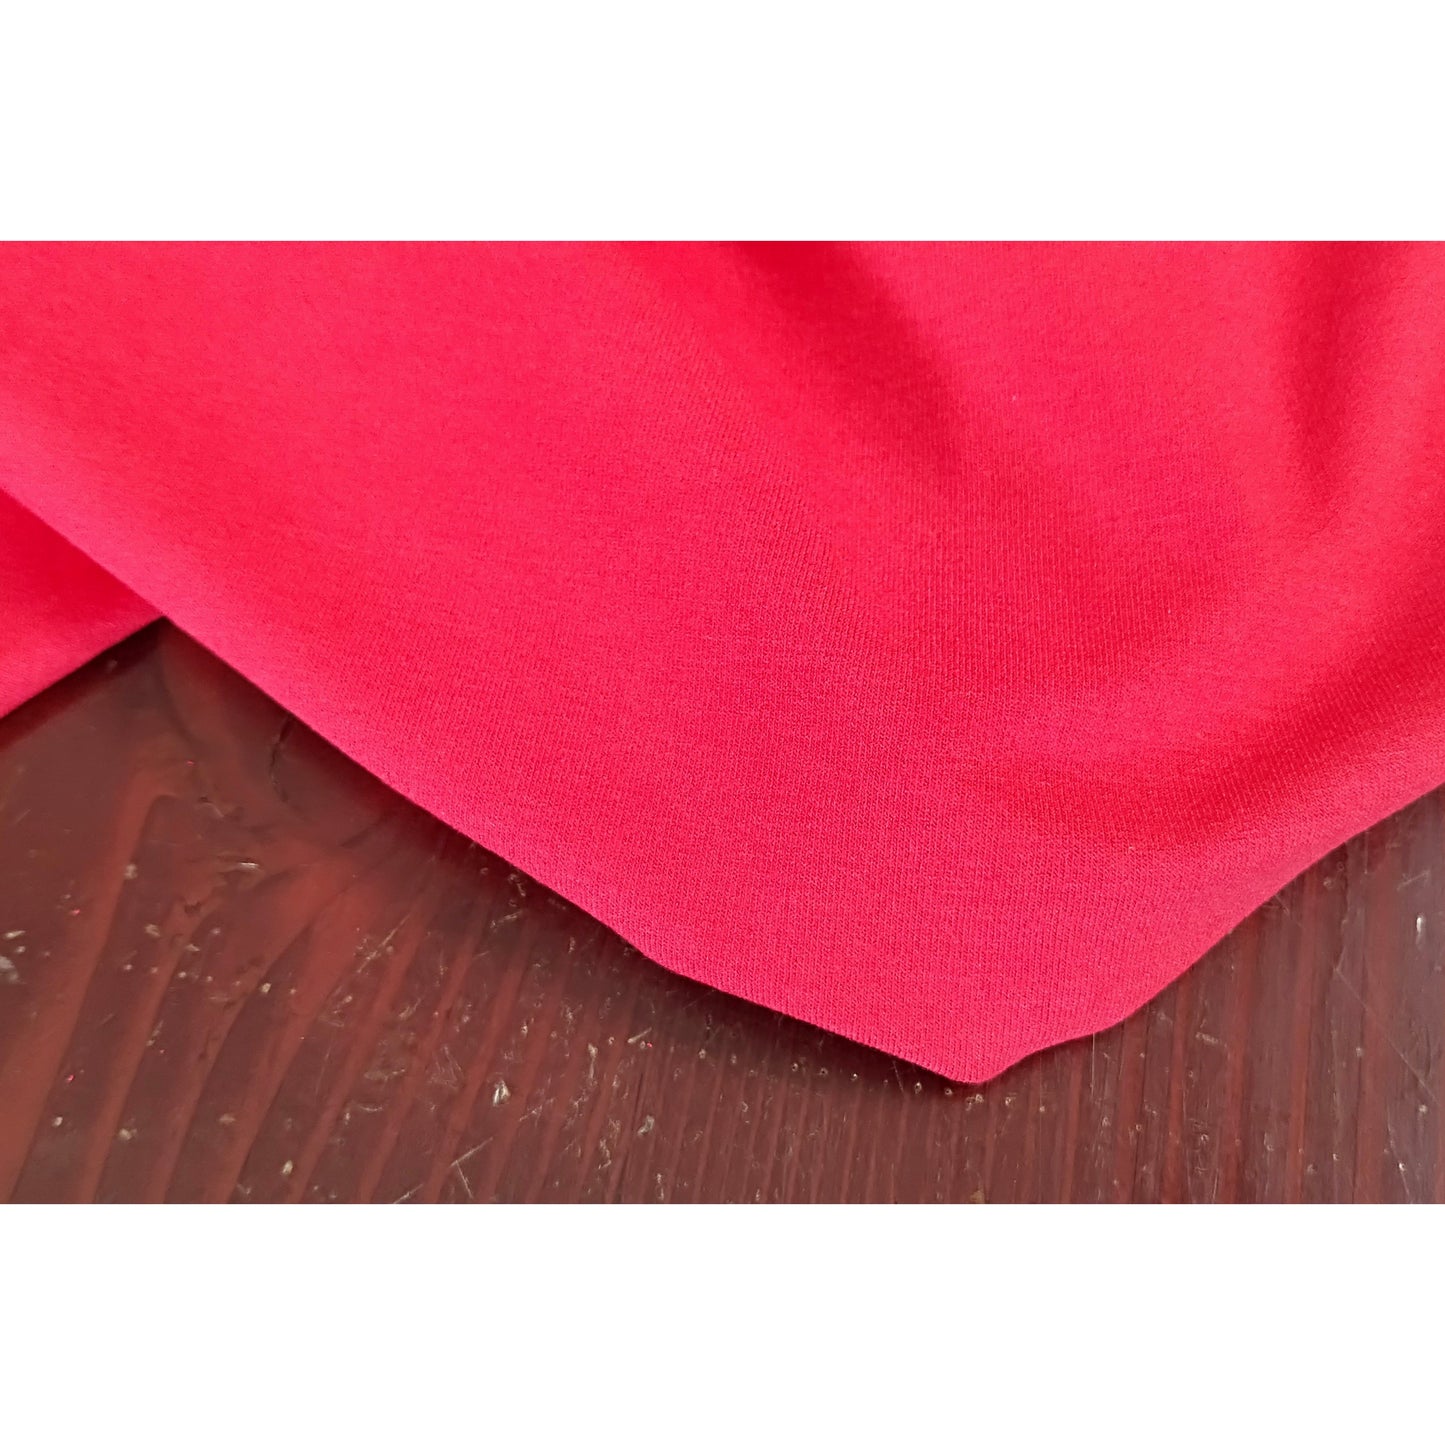 viscose/spandex fabric - red- sold by 1/2mtr